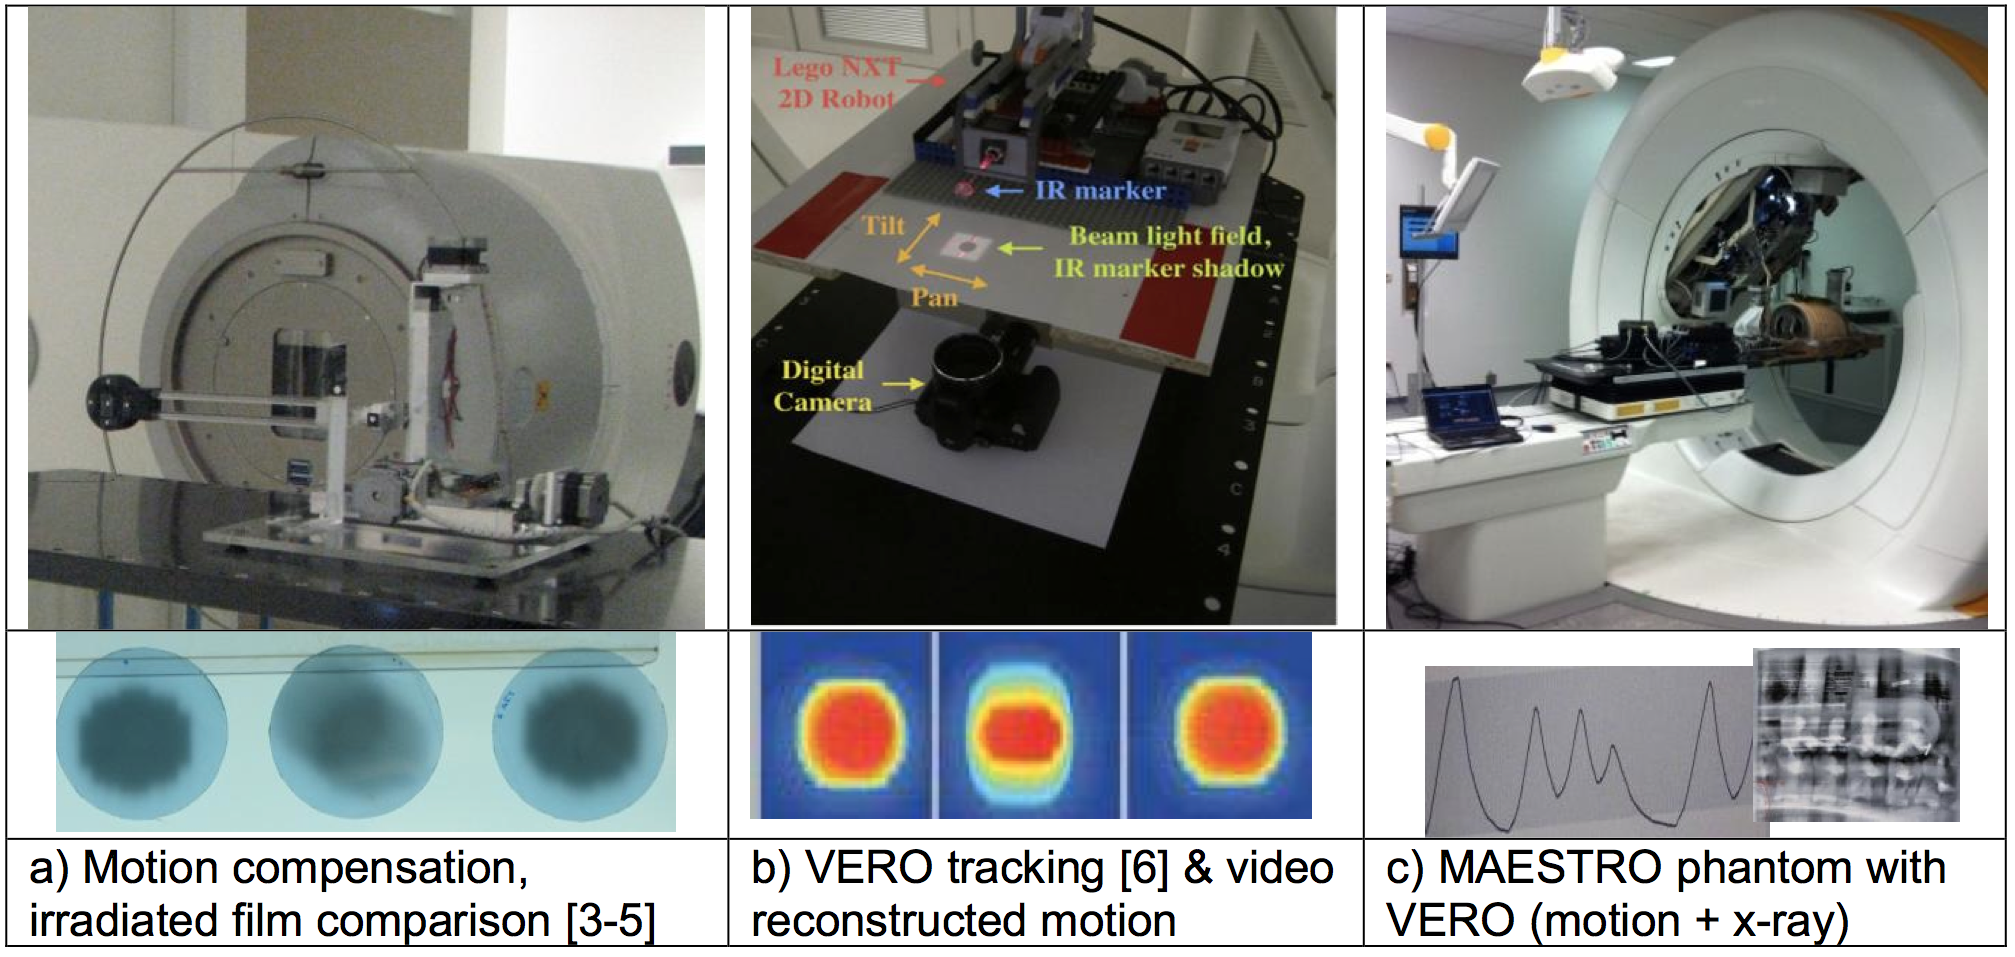 Figure 2: Evaluating the performance of motion tracking and compensation exploited by UZ
Brussels, Belgium and Brainlab, Germany to assess and subsequently deploy clinically the VERO.